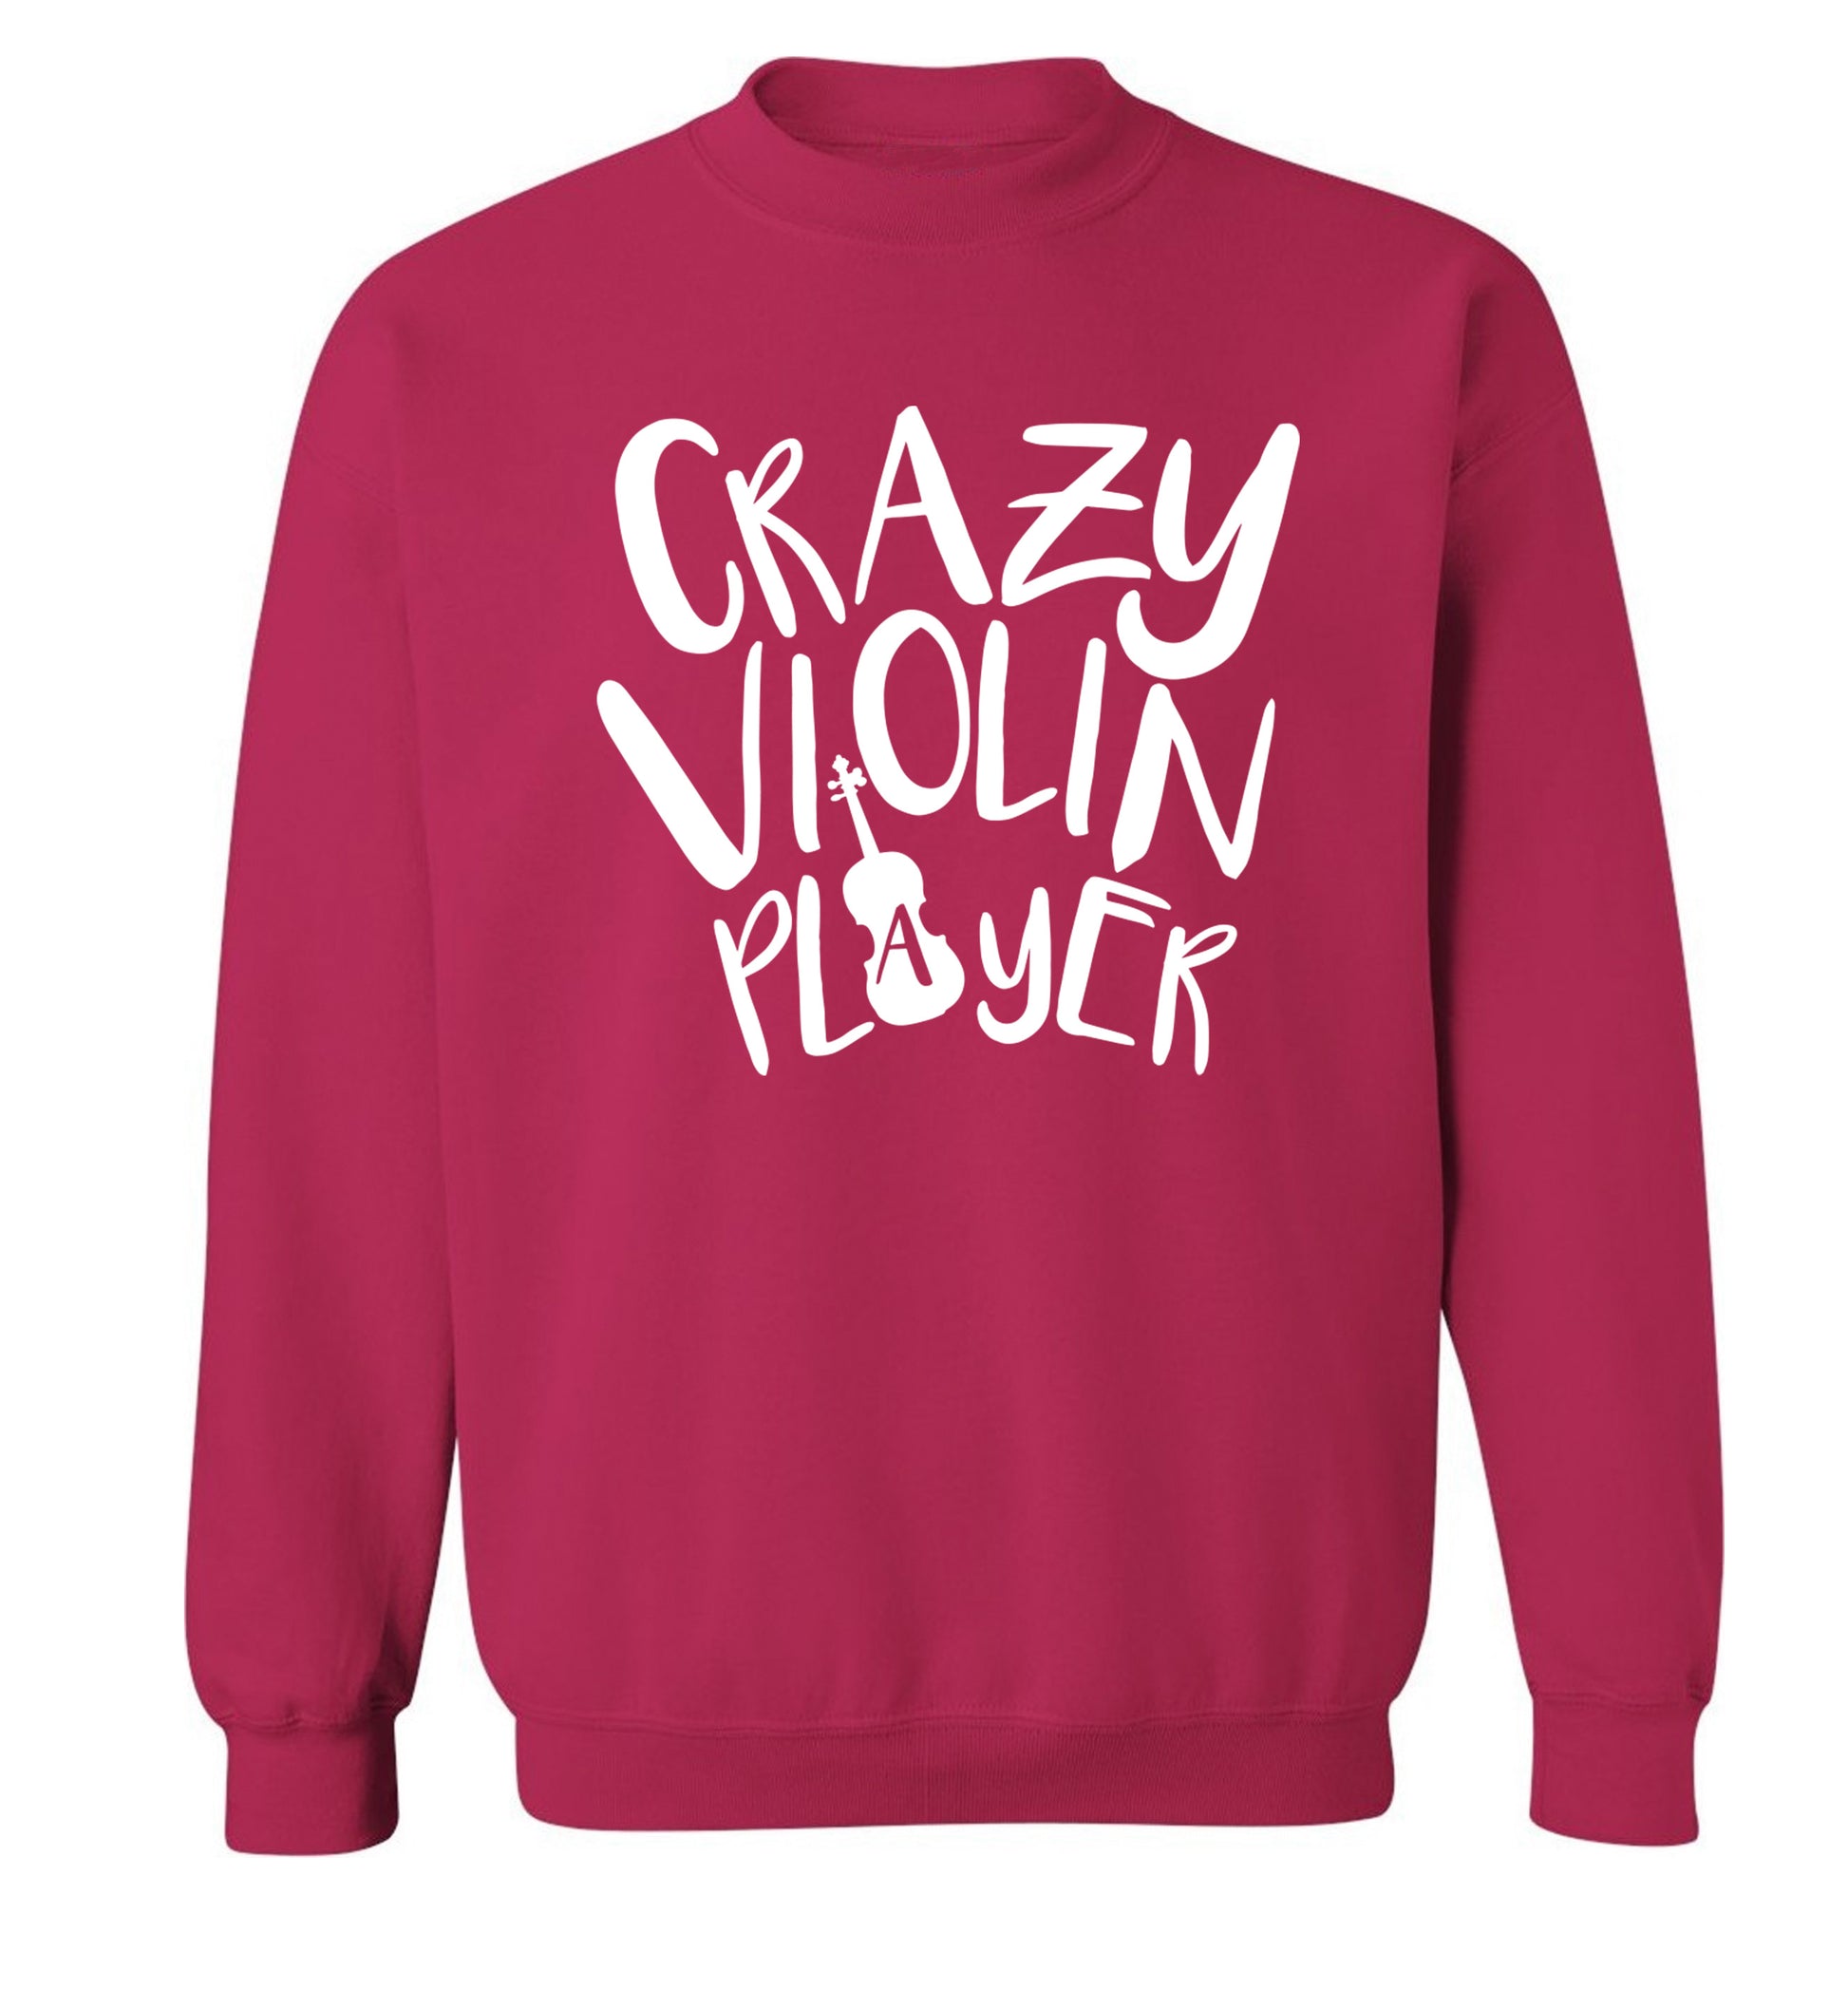 Crazy Violin Player Adult's unisex pink Sweater 2XL